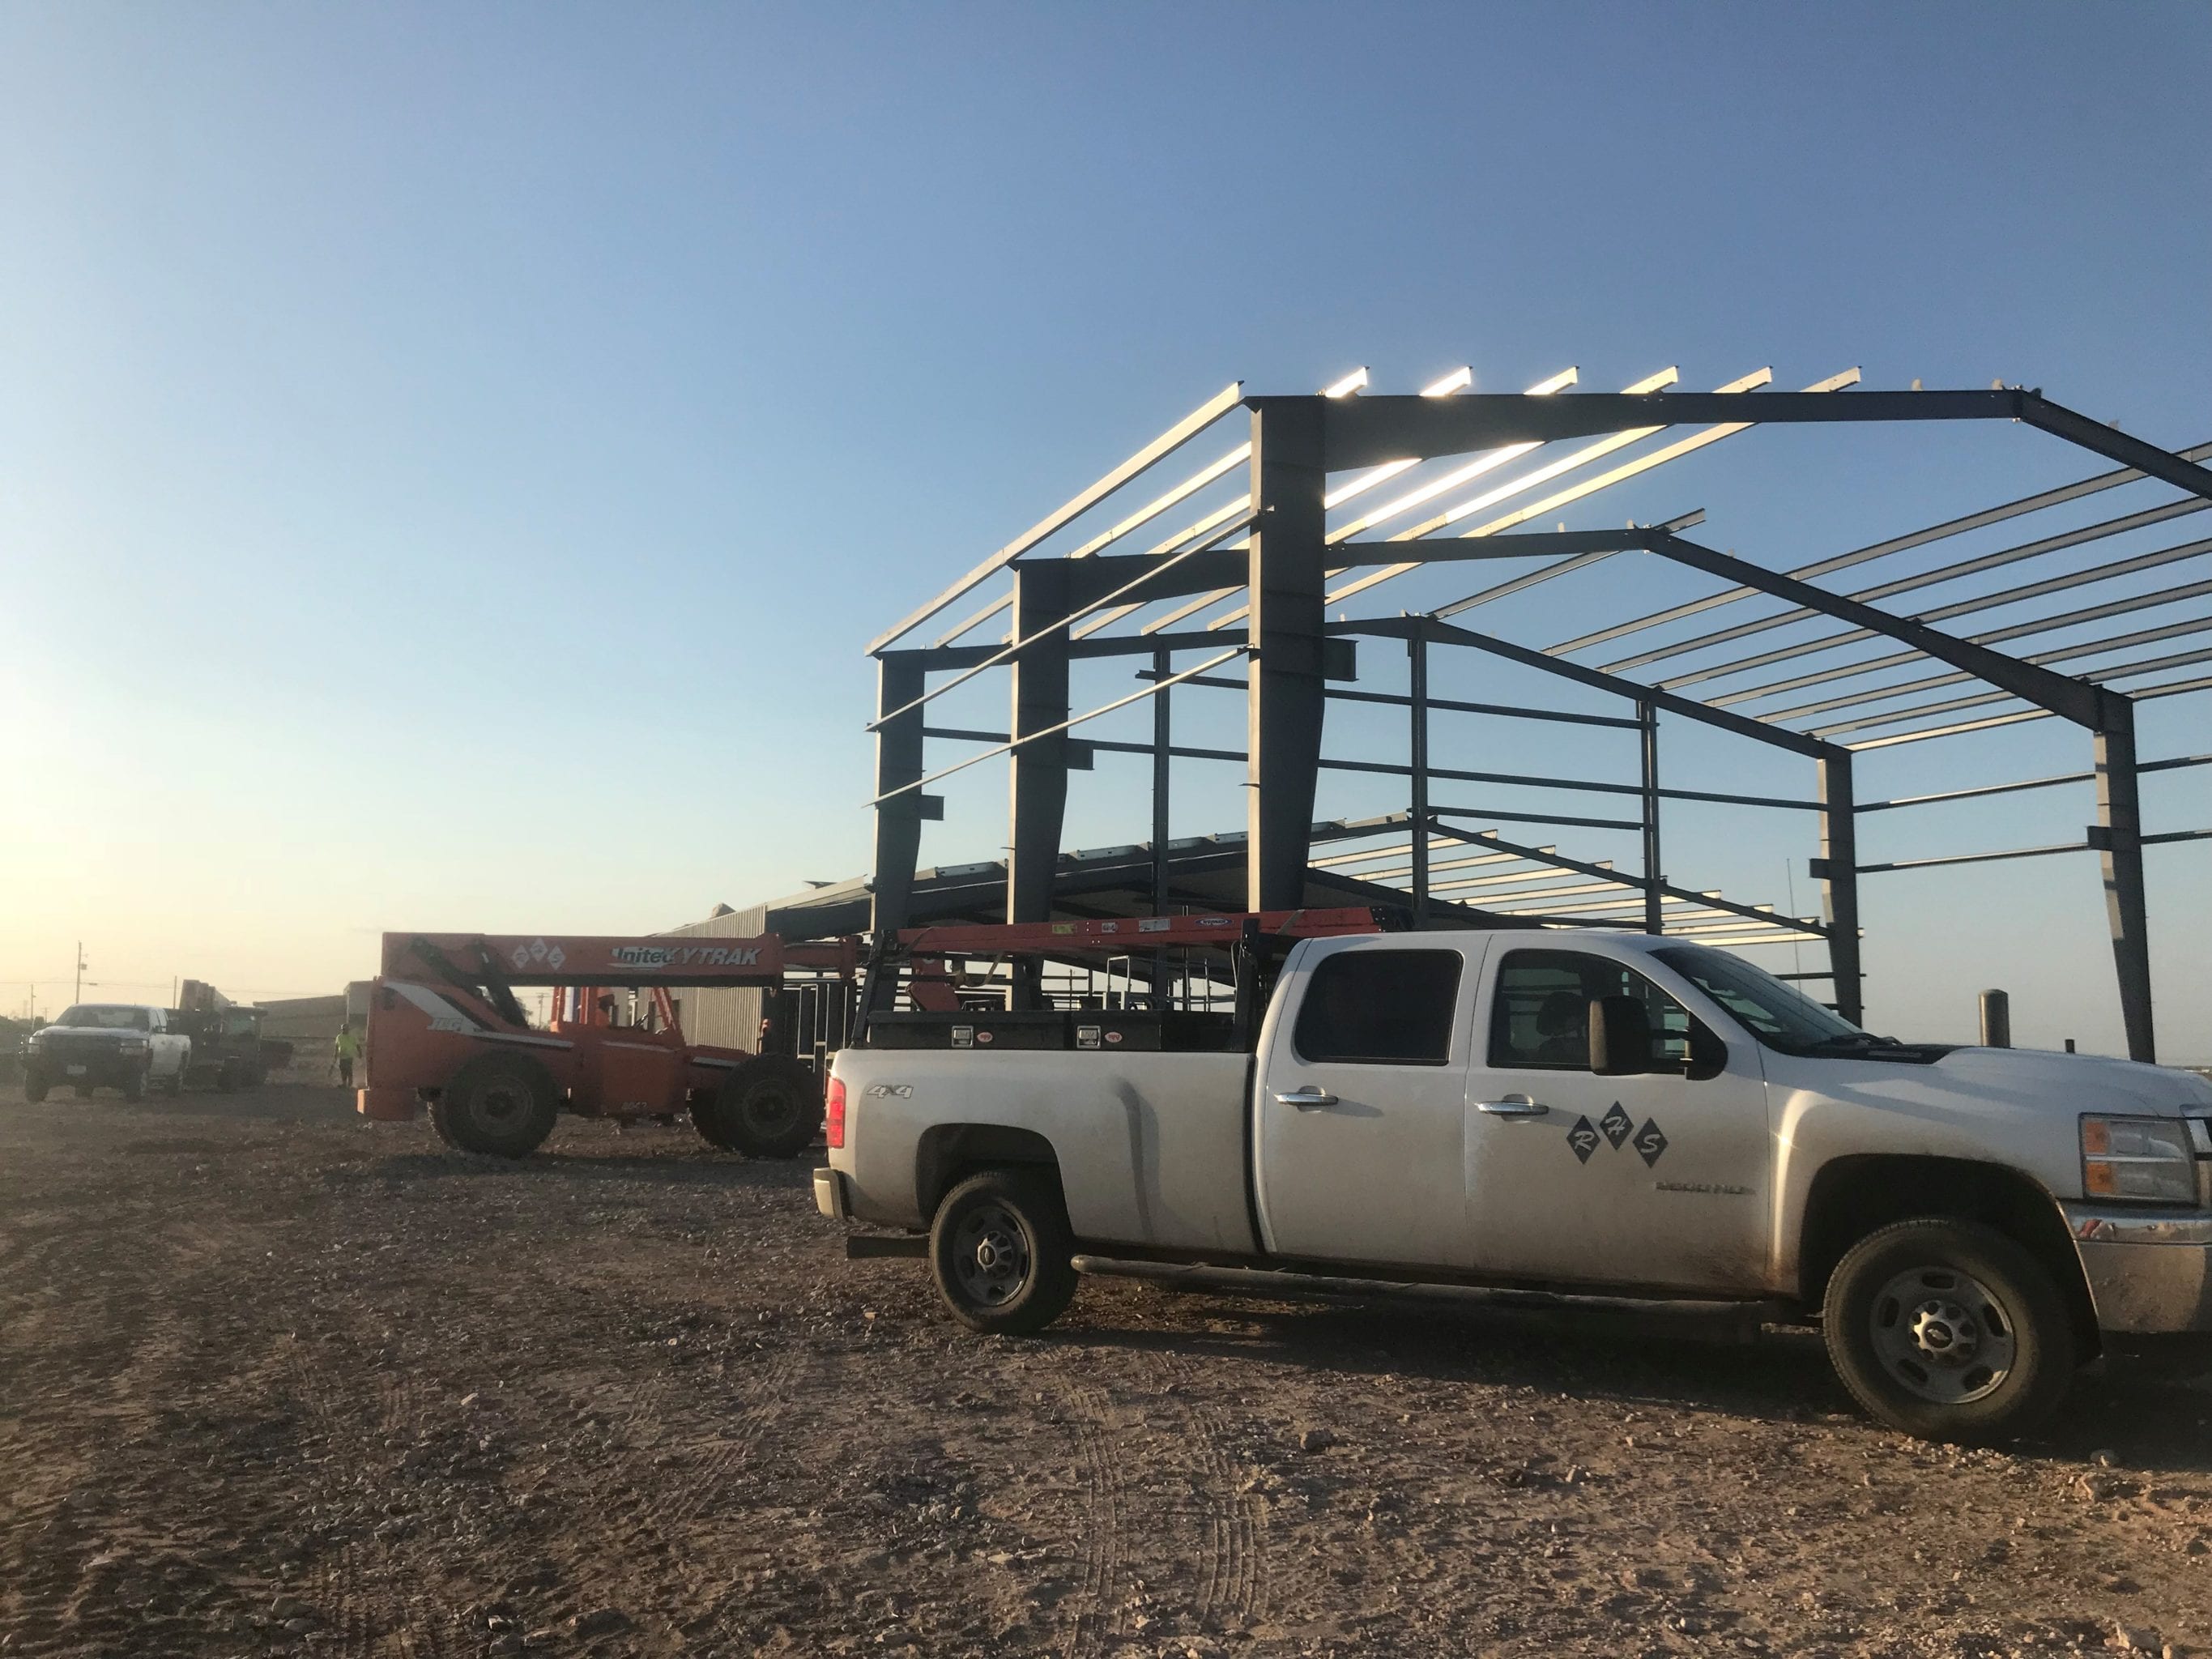 metal building supply and erection services: Commercial Building Contractor in West Texas - RHS Construction Services